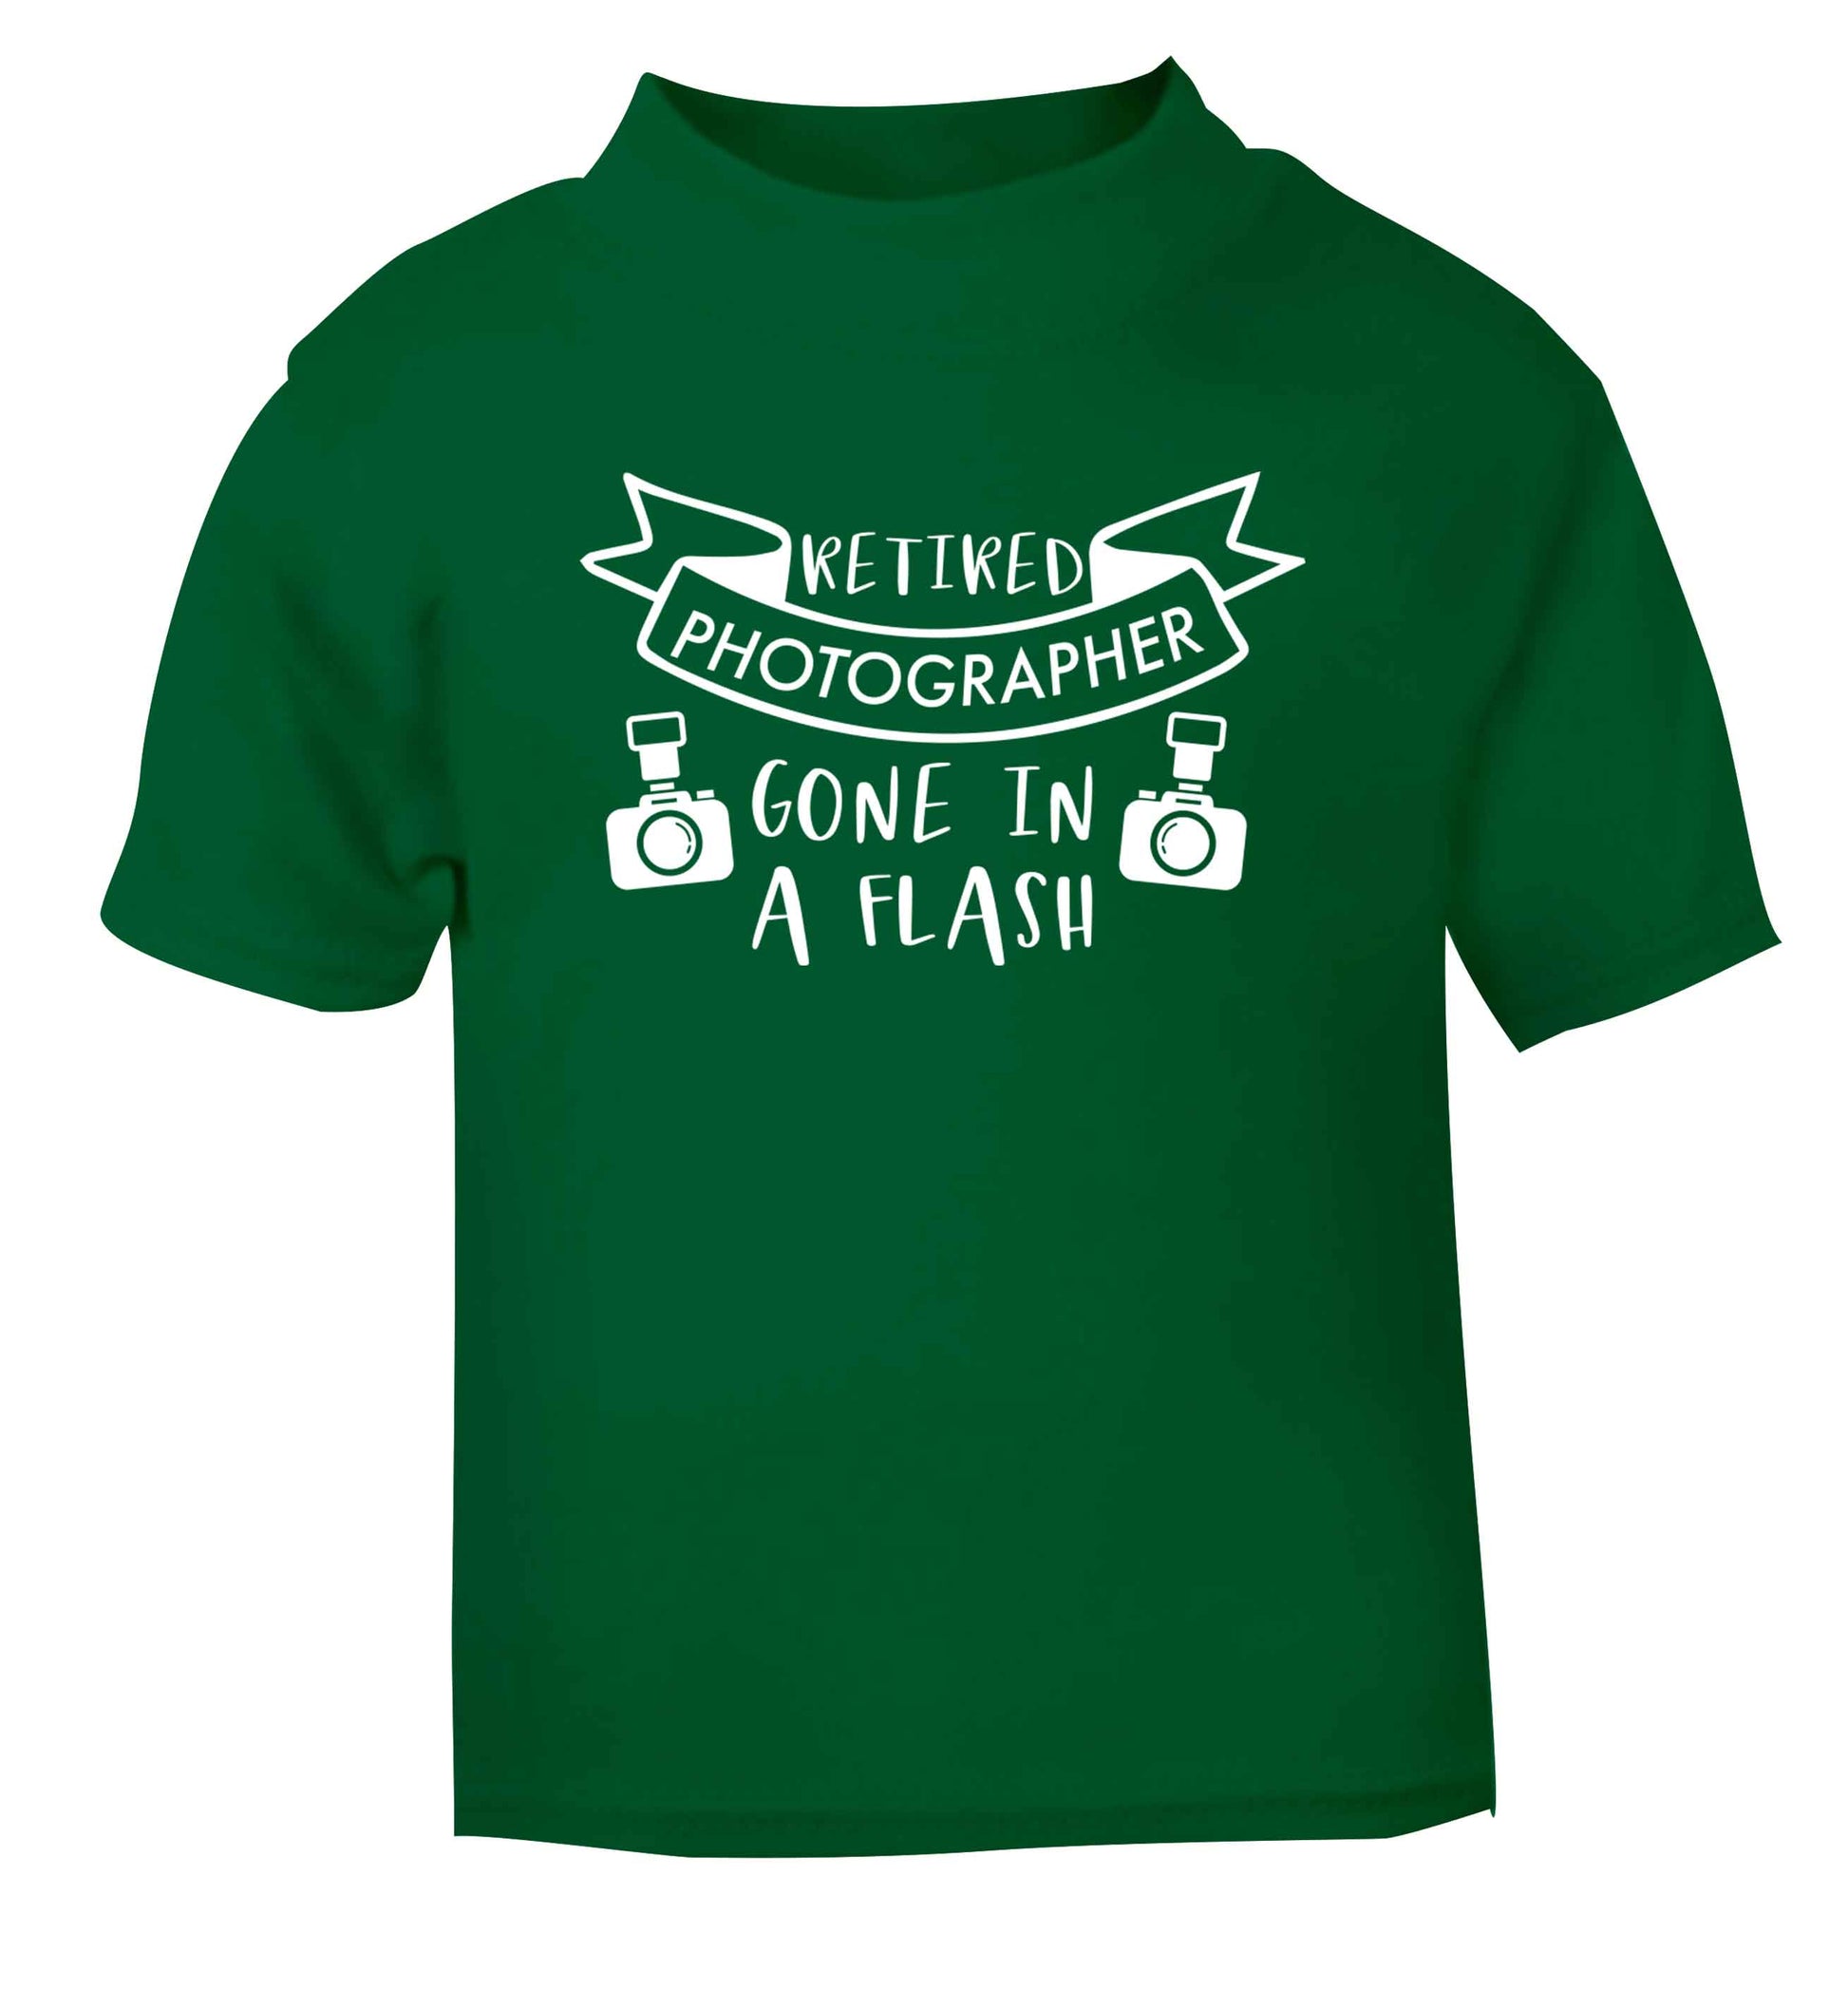 Retired photographer gone in a flash green Baby Toddler Tshirt 2 Years